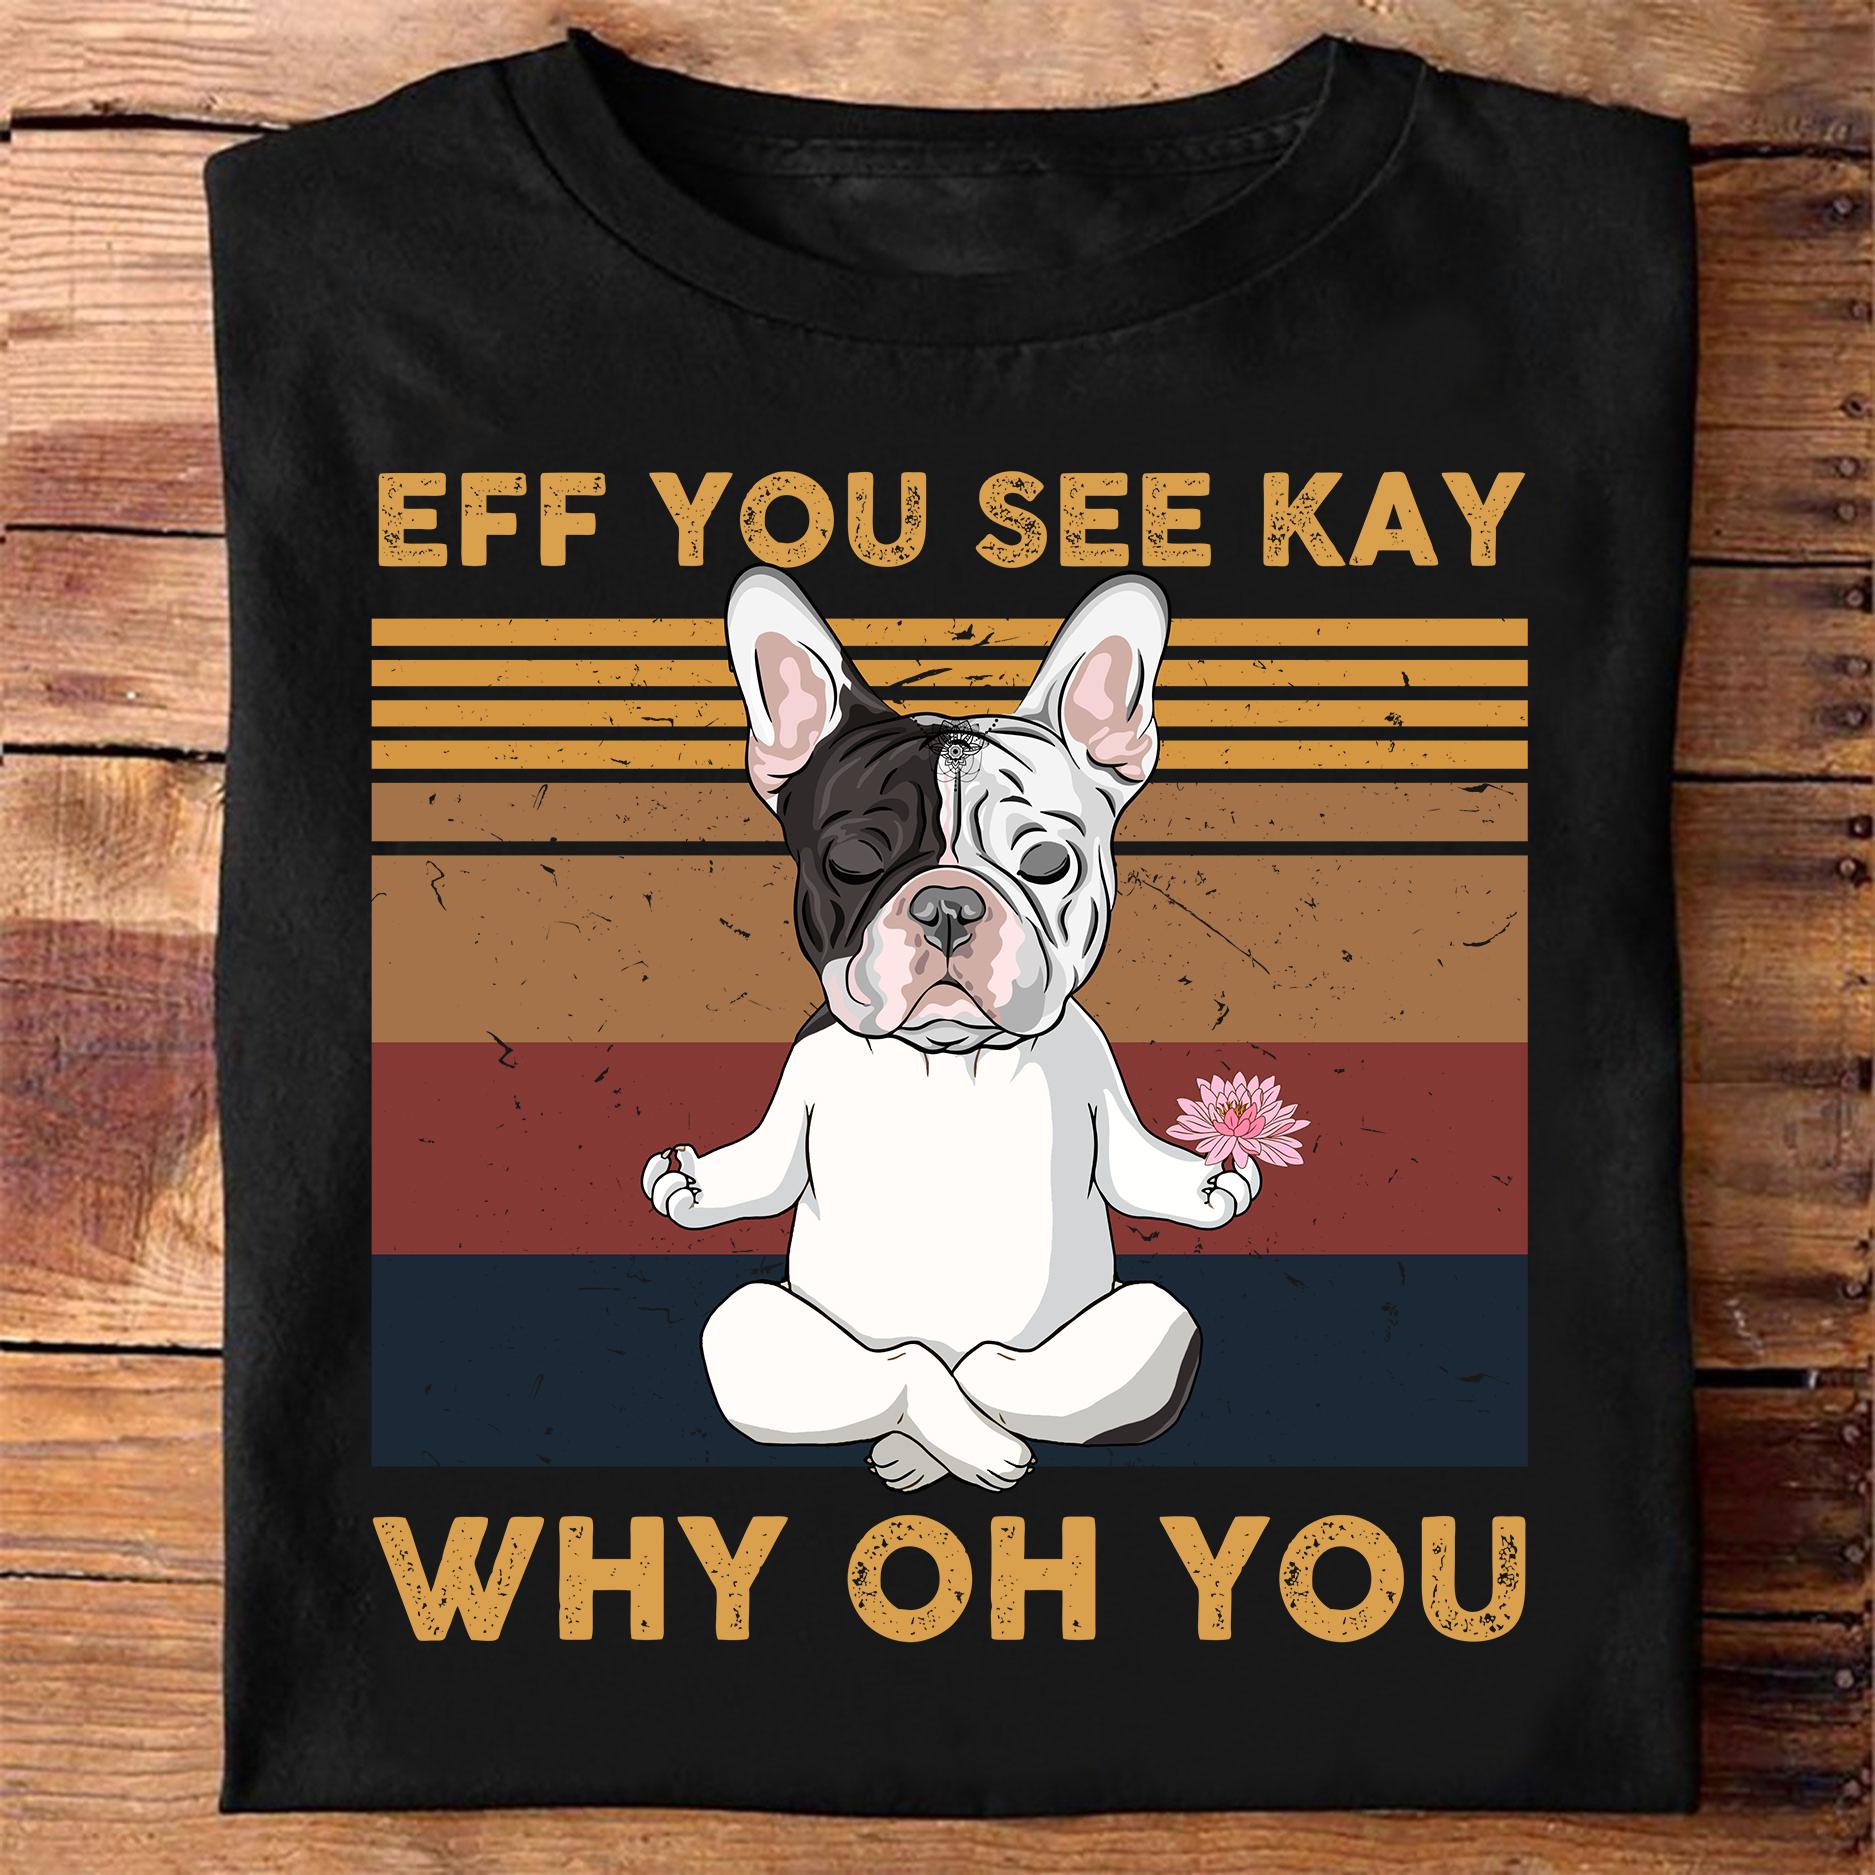 Eff you see kay, why oh you - Frenchie dog doing yoga, finding inner peace